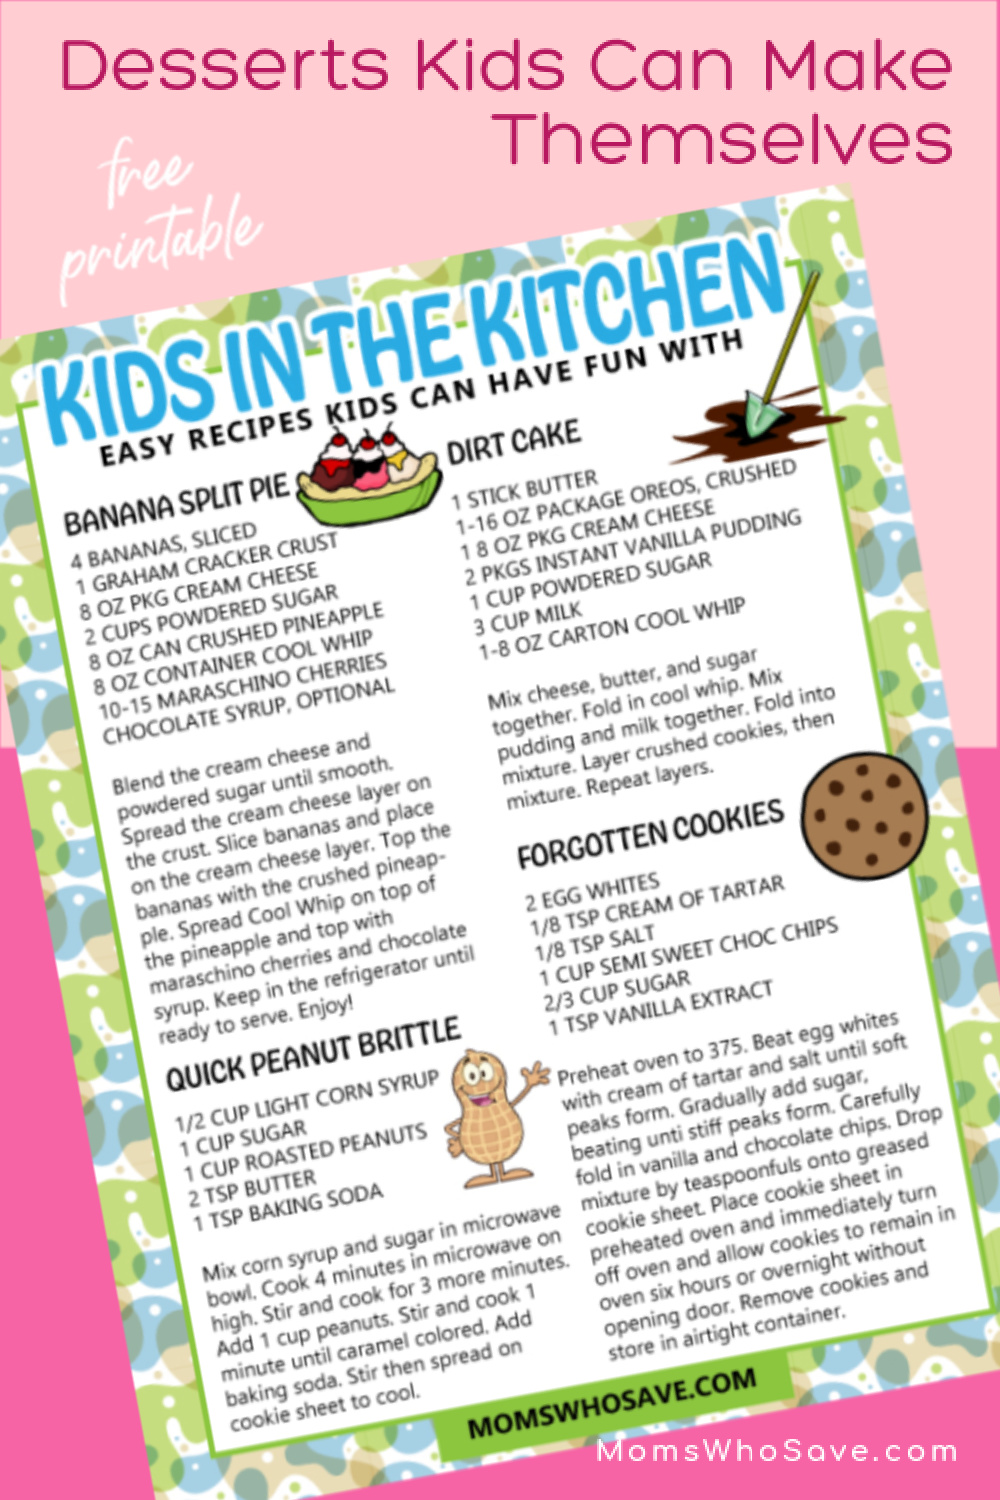 Desserts Kids Can Make by Themselves